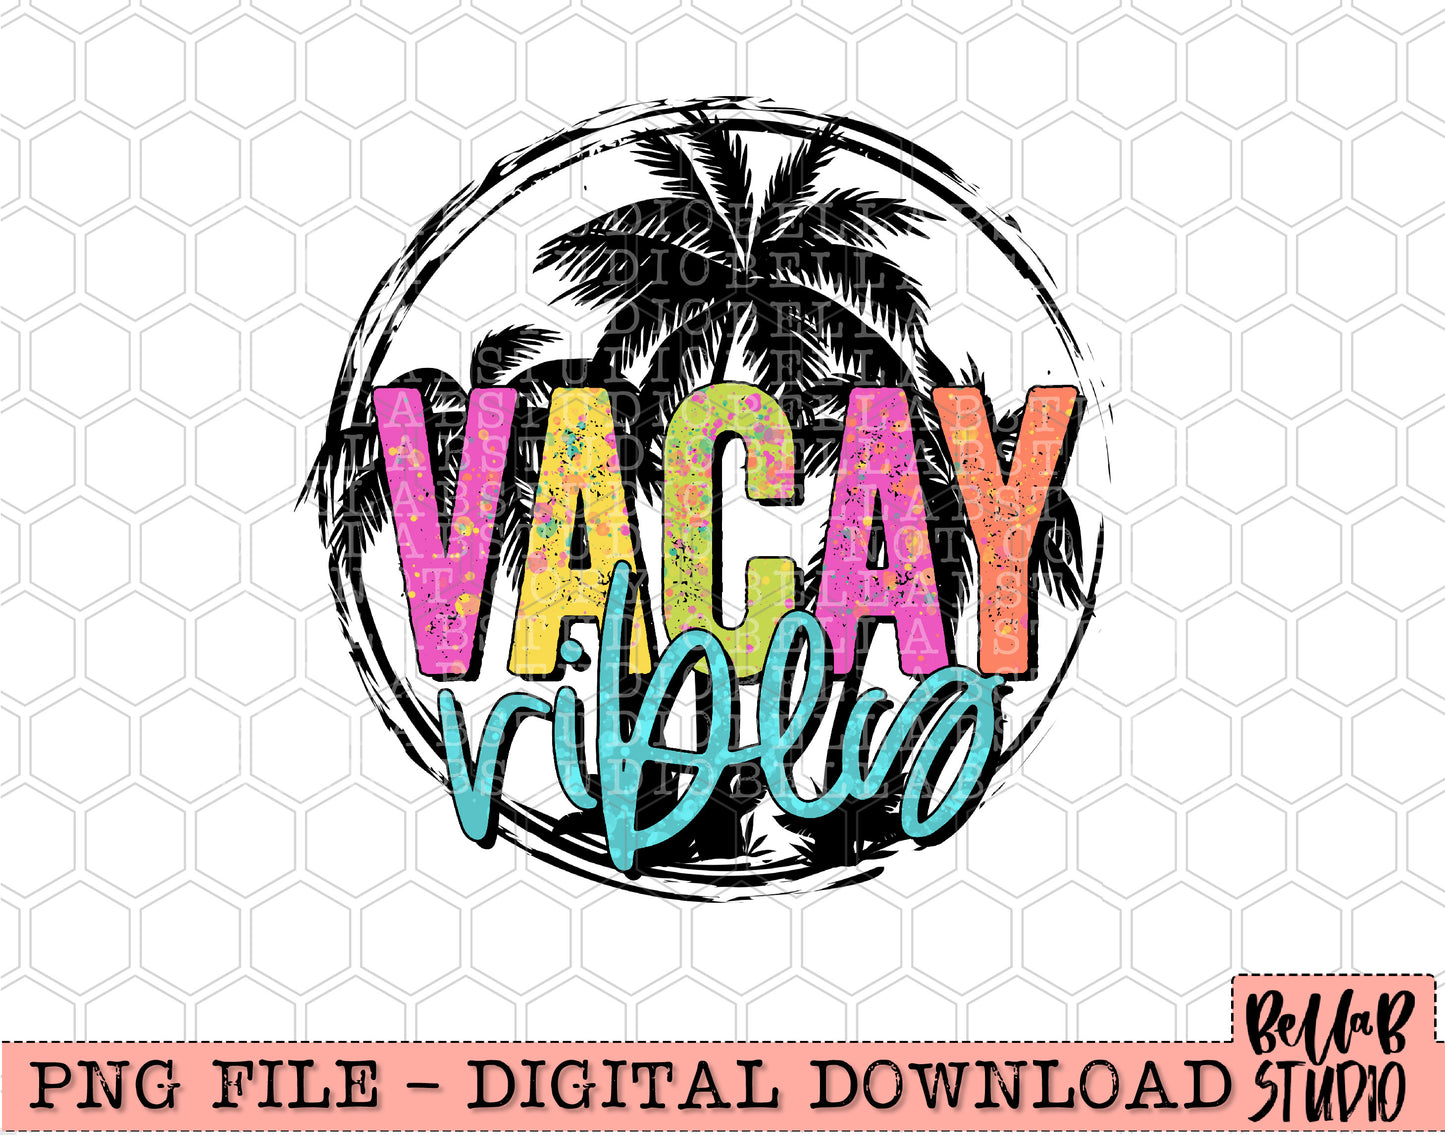 Vacay Vibes Sublimation Design